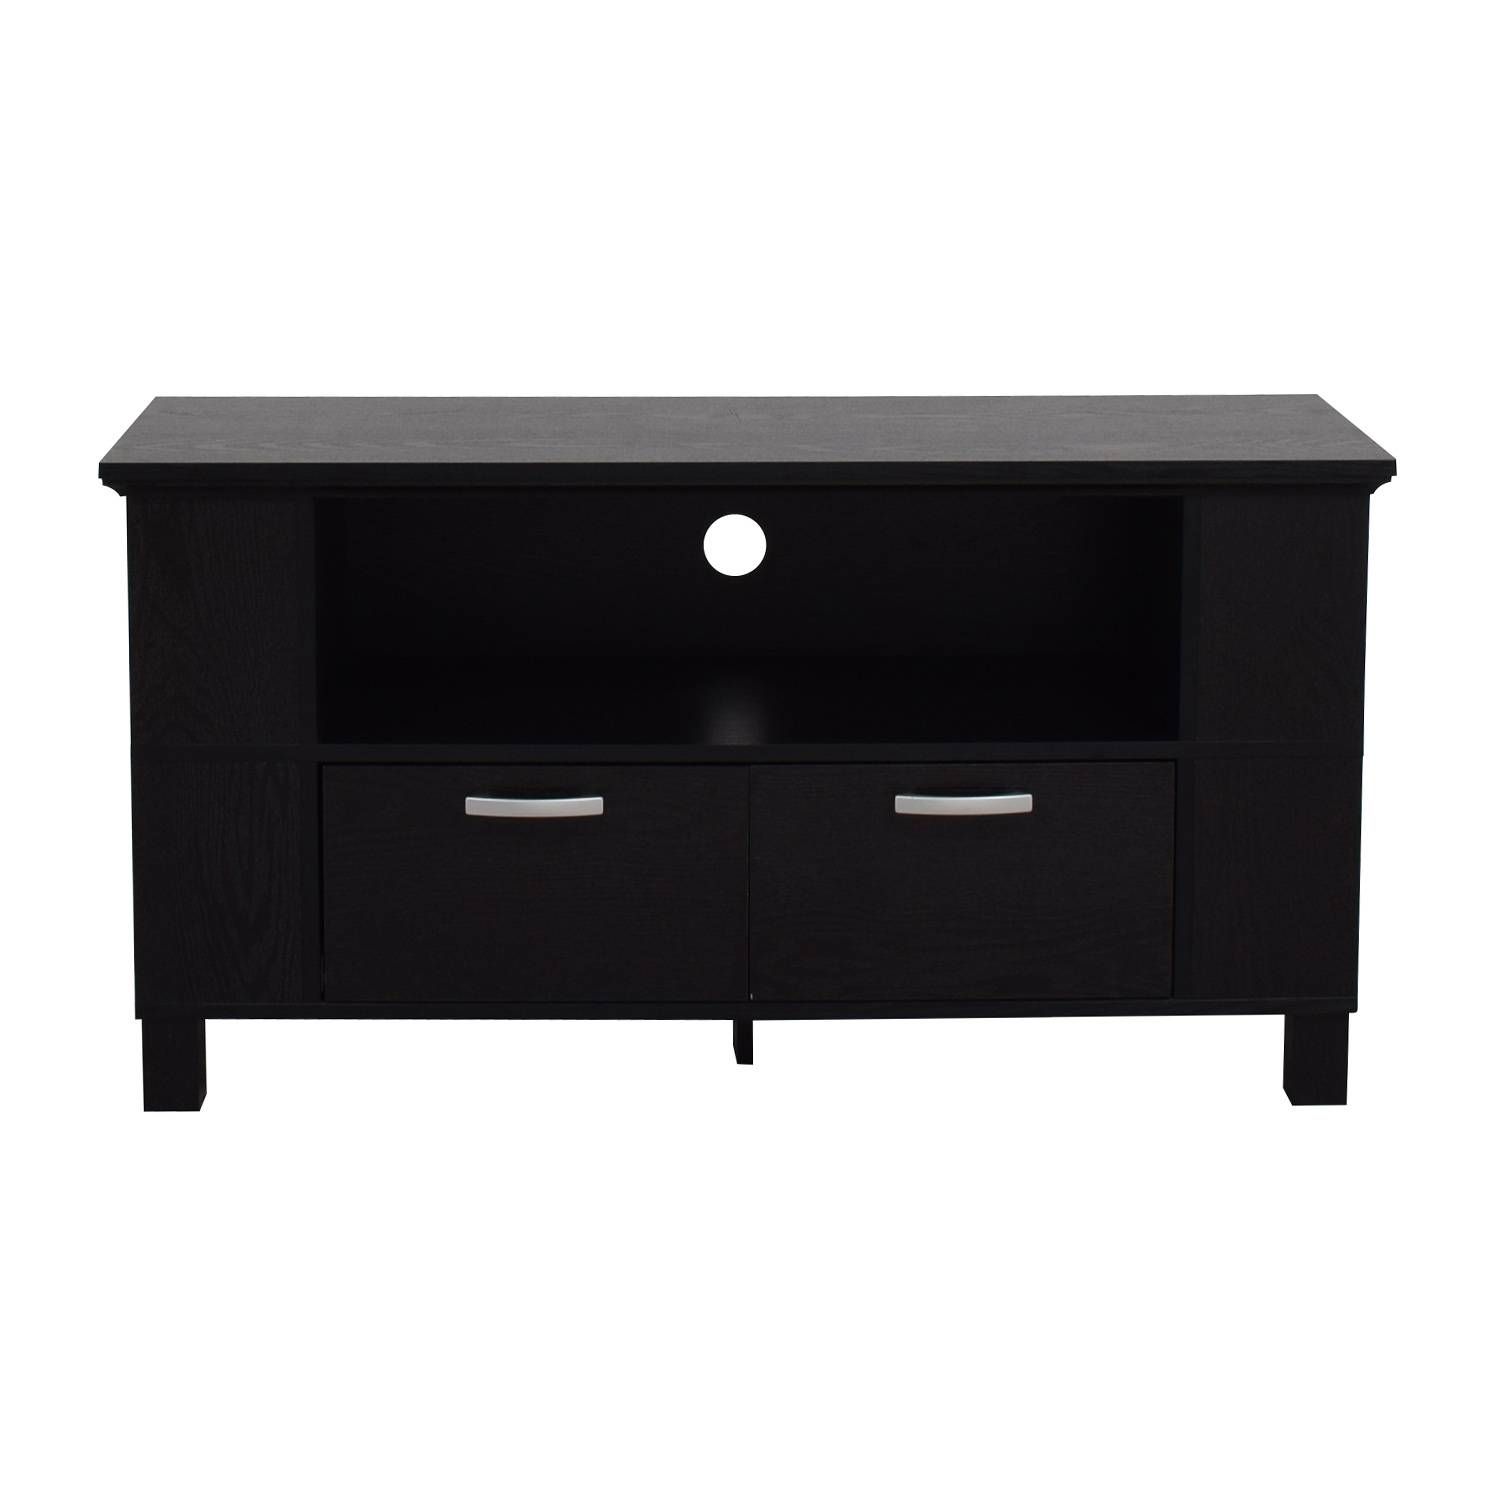 34% Off – Ikea Ikea Two Drawer Tv Stand / Storage Throughout Expresso Tv Stands (View 7 of 15)